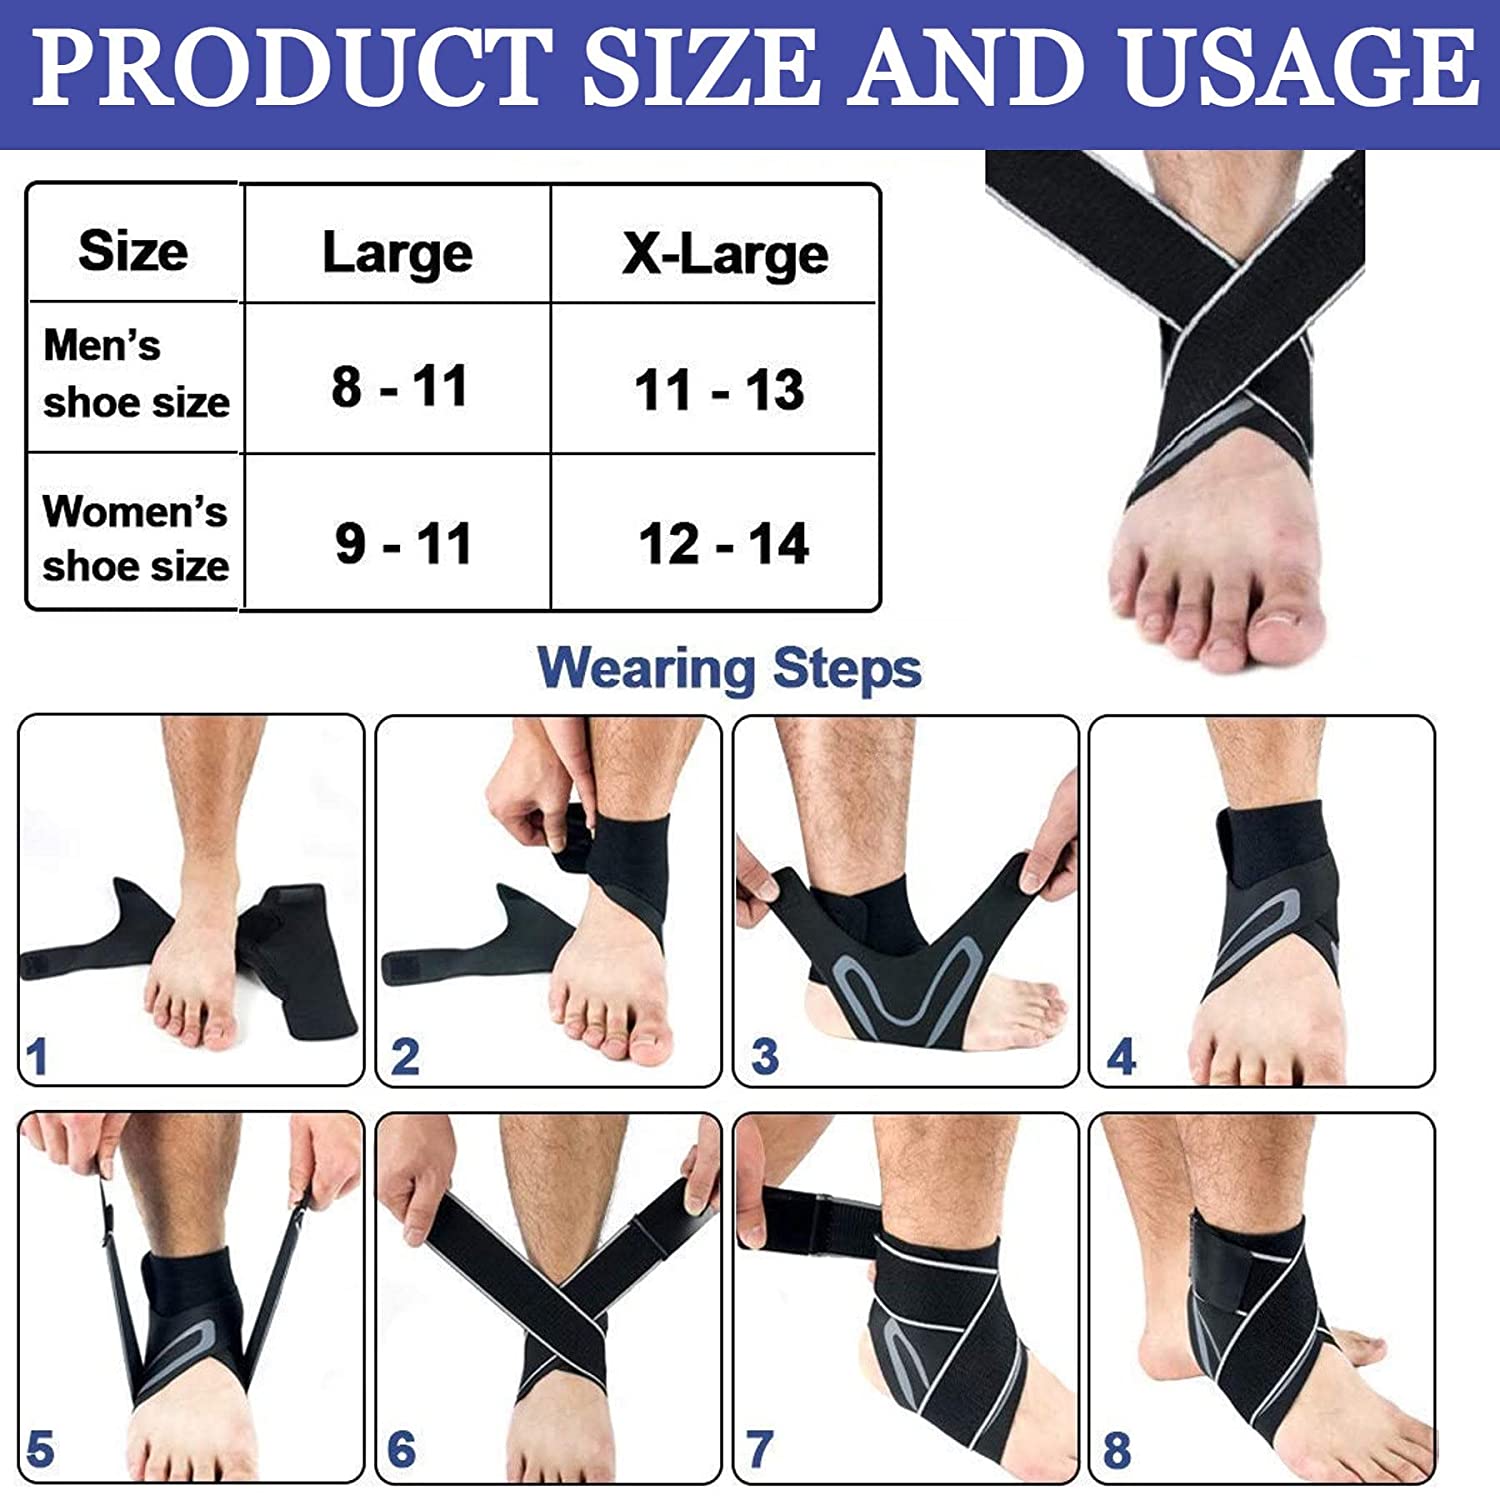 NUCARTURE ® Ankle Support with Brace and Reliable Sleeve and Bandage Wrap for Foot Guard Compression for Pain Relief for Men Women